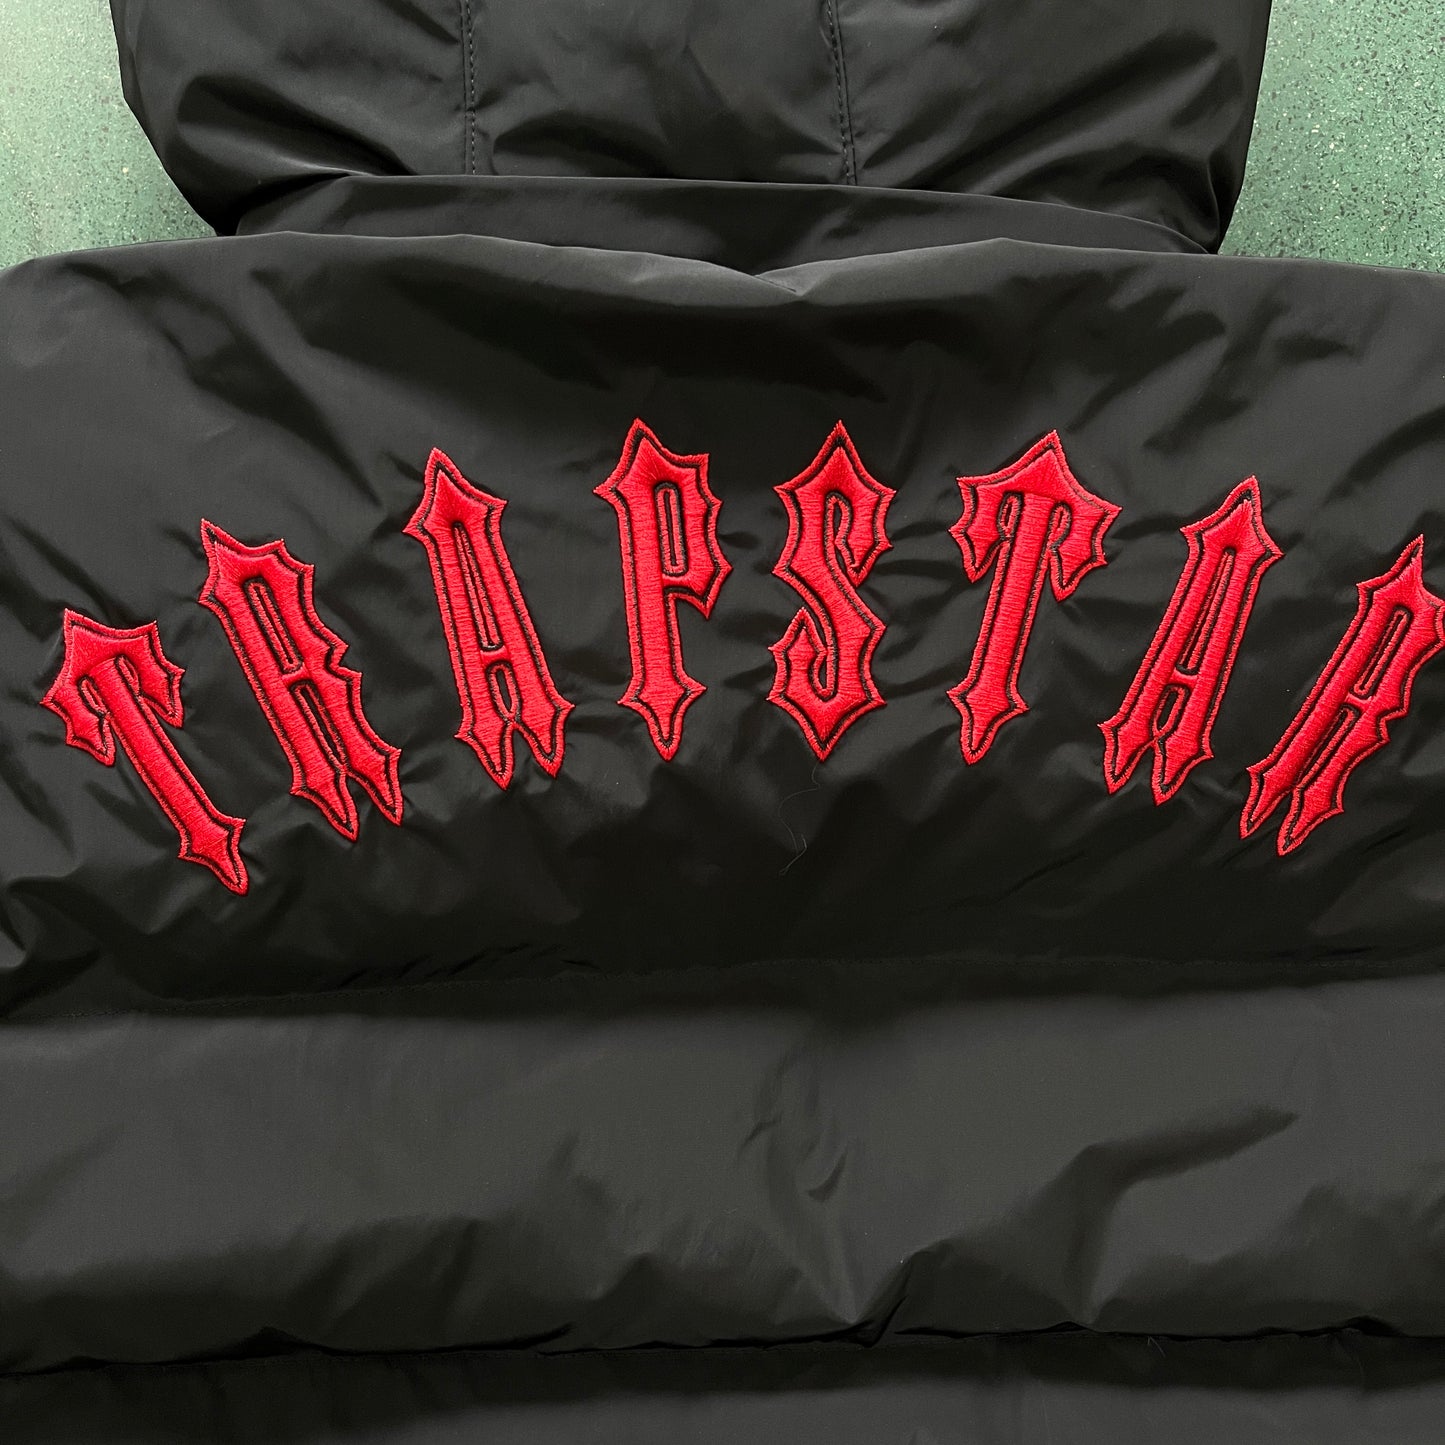 Trapstar Irongate Detachable Hooded Puffer Jacket-Black Red